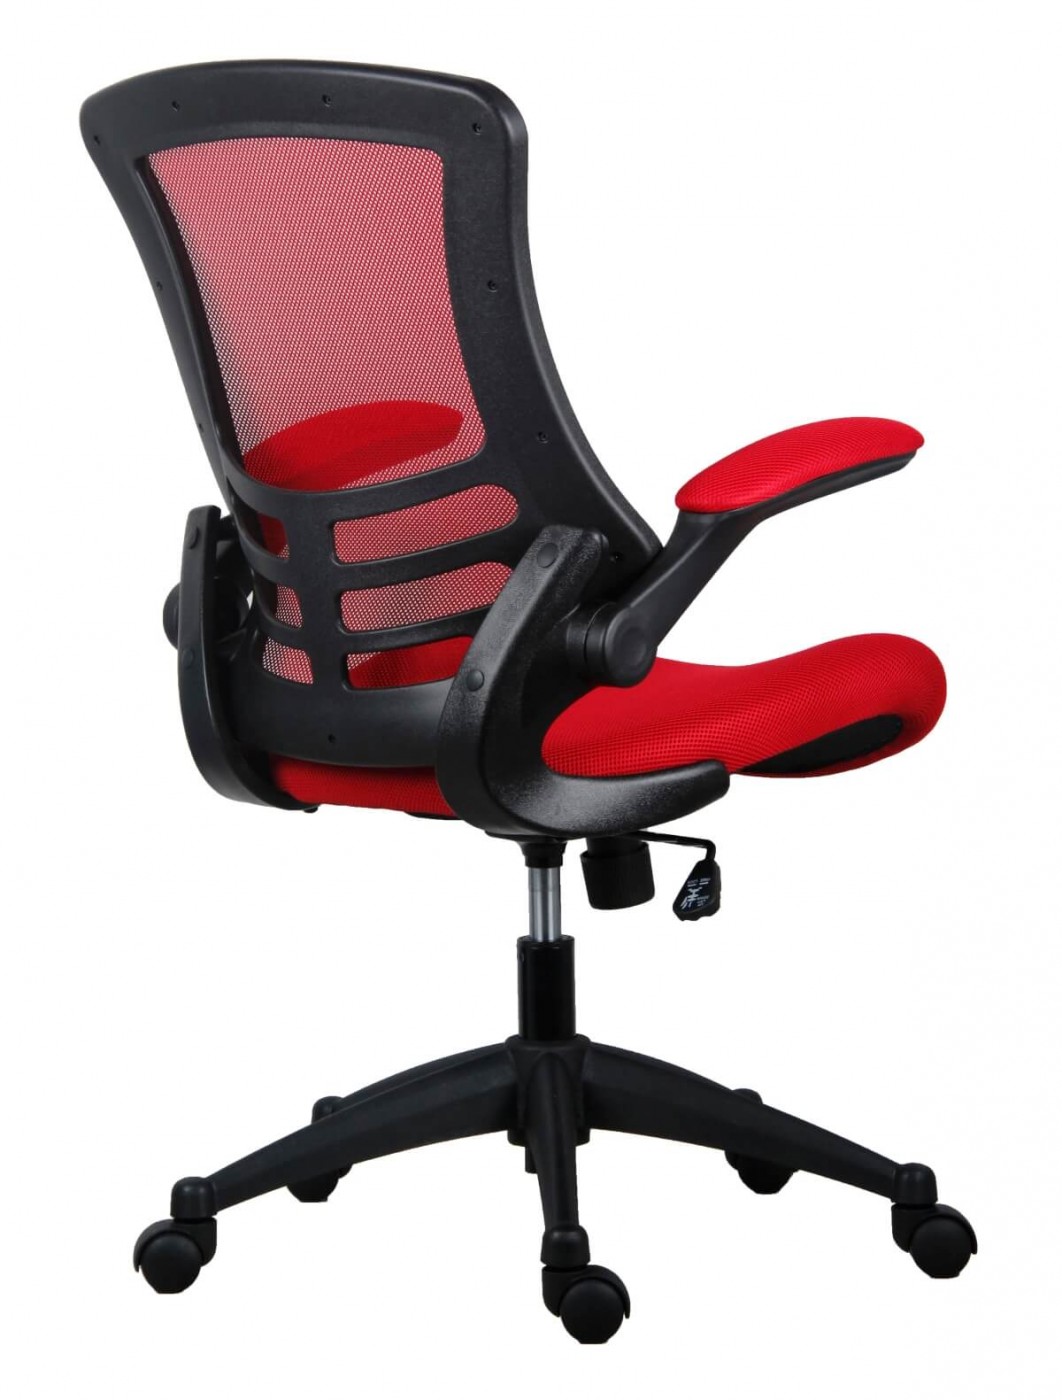 XklAyhg1 Tc Marcos Office Chair Ch0790rd 4 